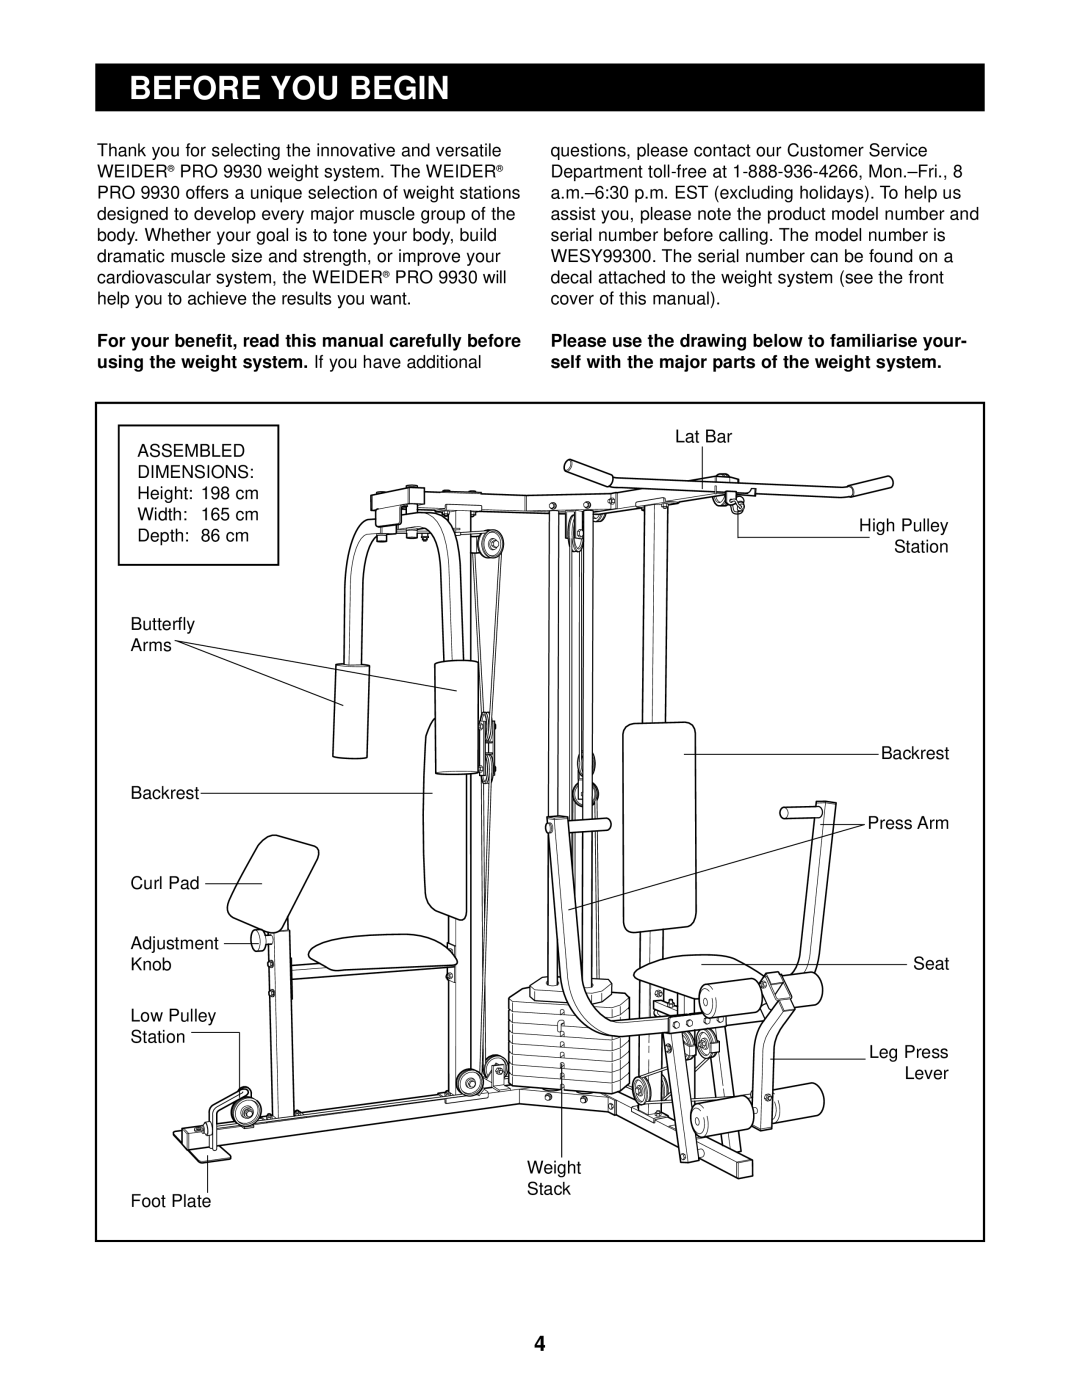 Weider WESY99300 user manual Before You Begin, using the weight system 